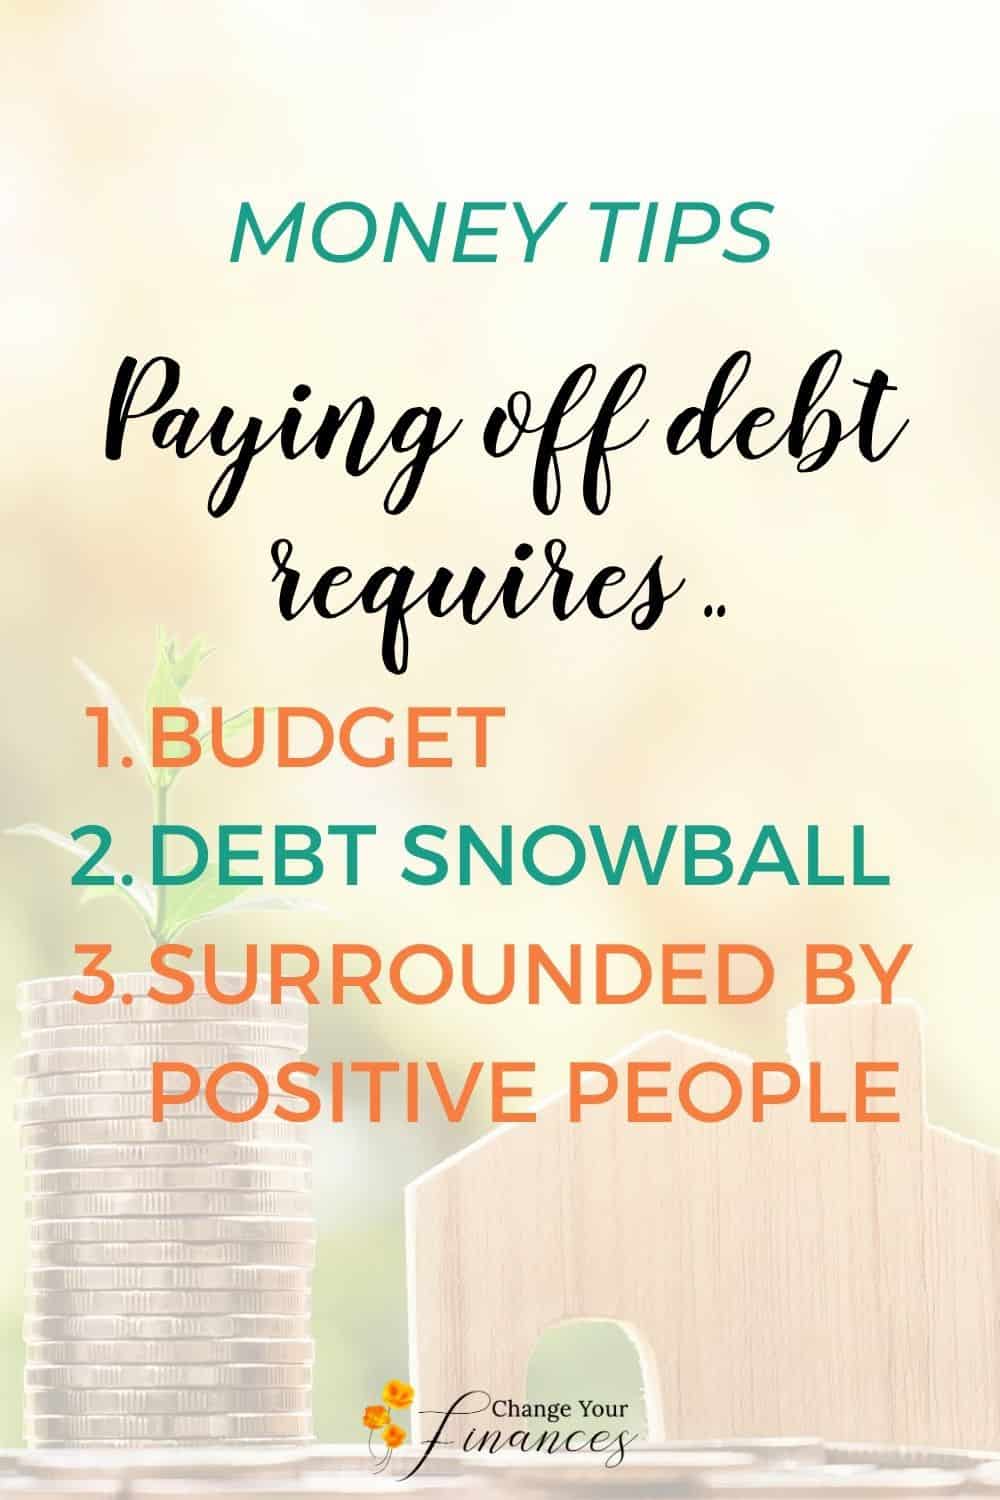 The Best Secrets to Pay Off Debt Fast and Get On With Your Life (2)